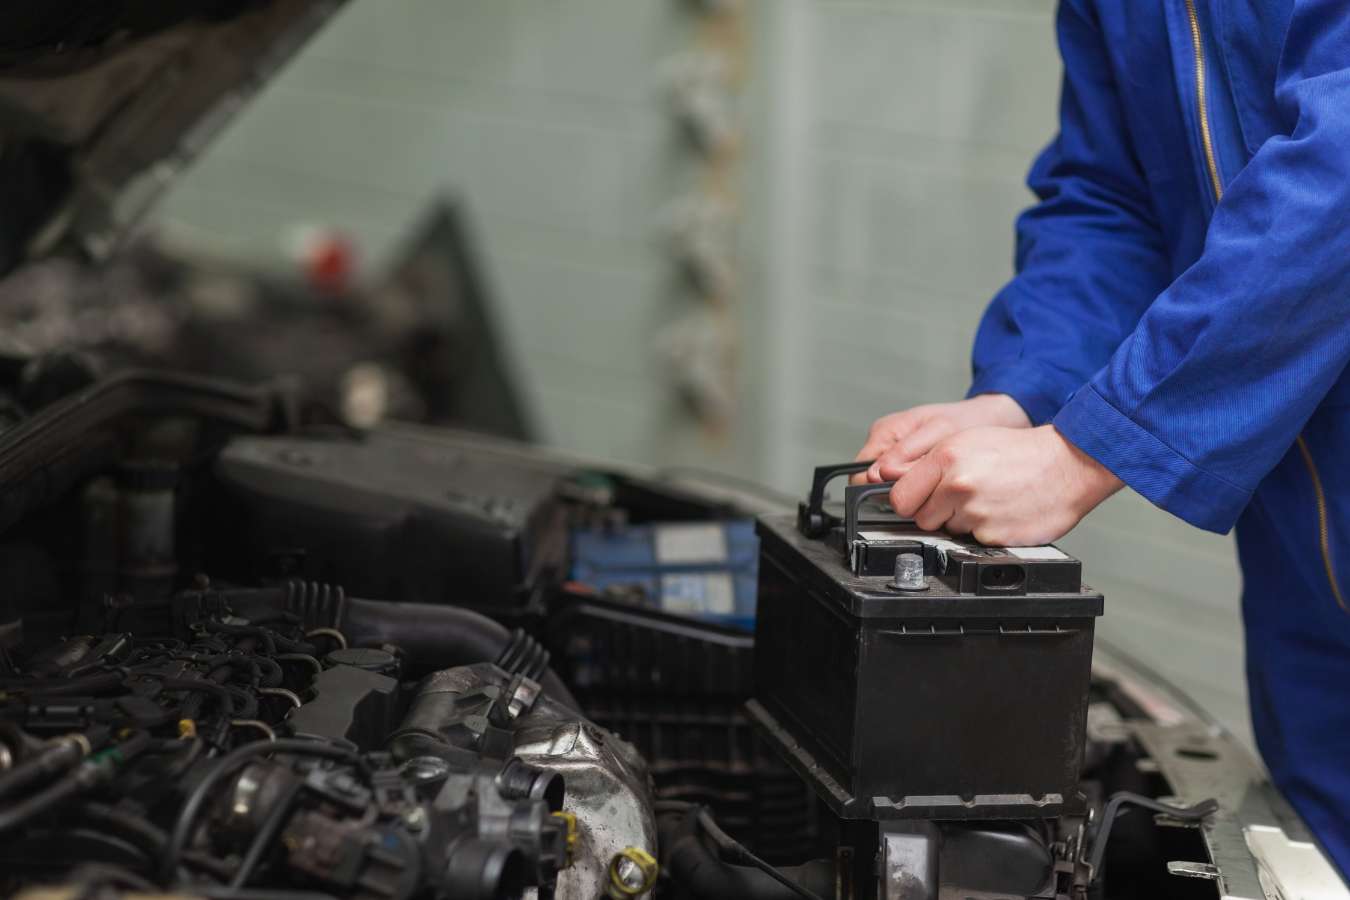 replacing your car battery - all you should know about installing the new battery